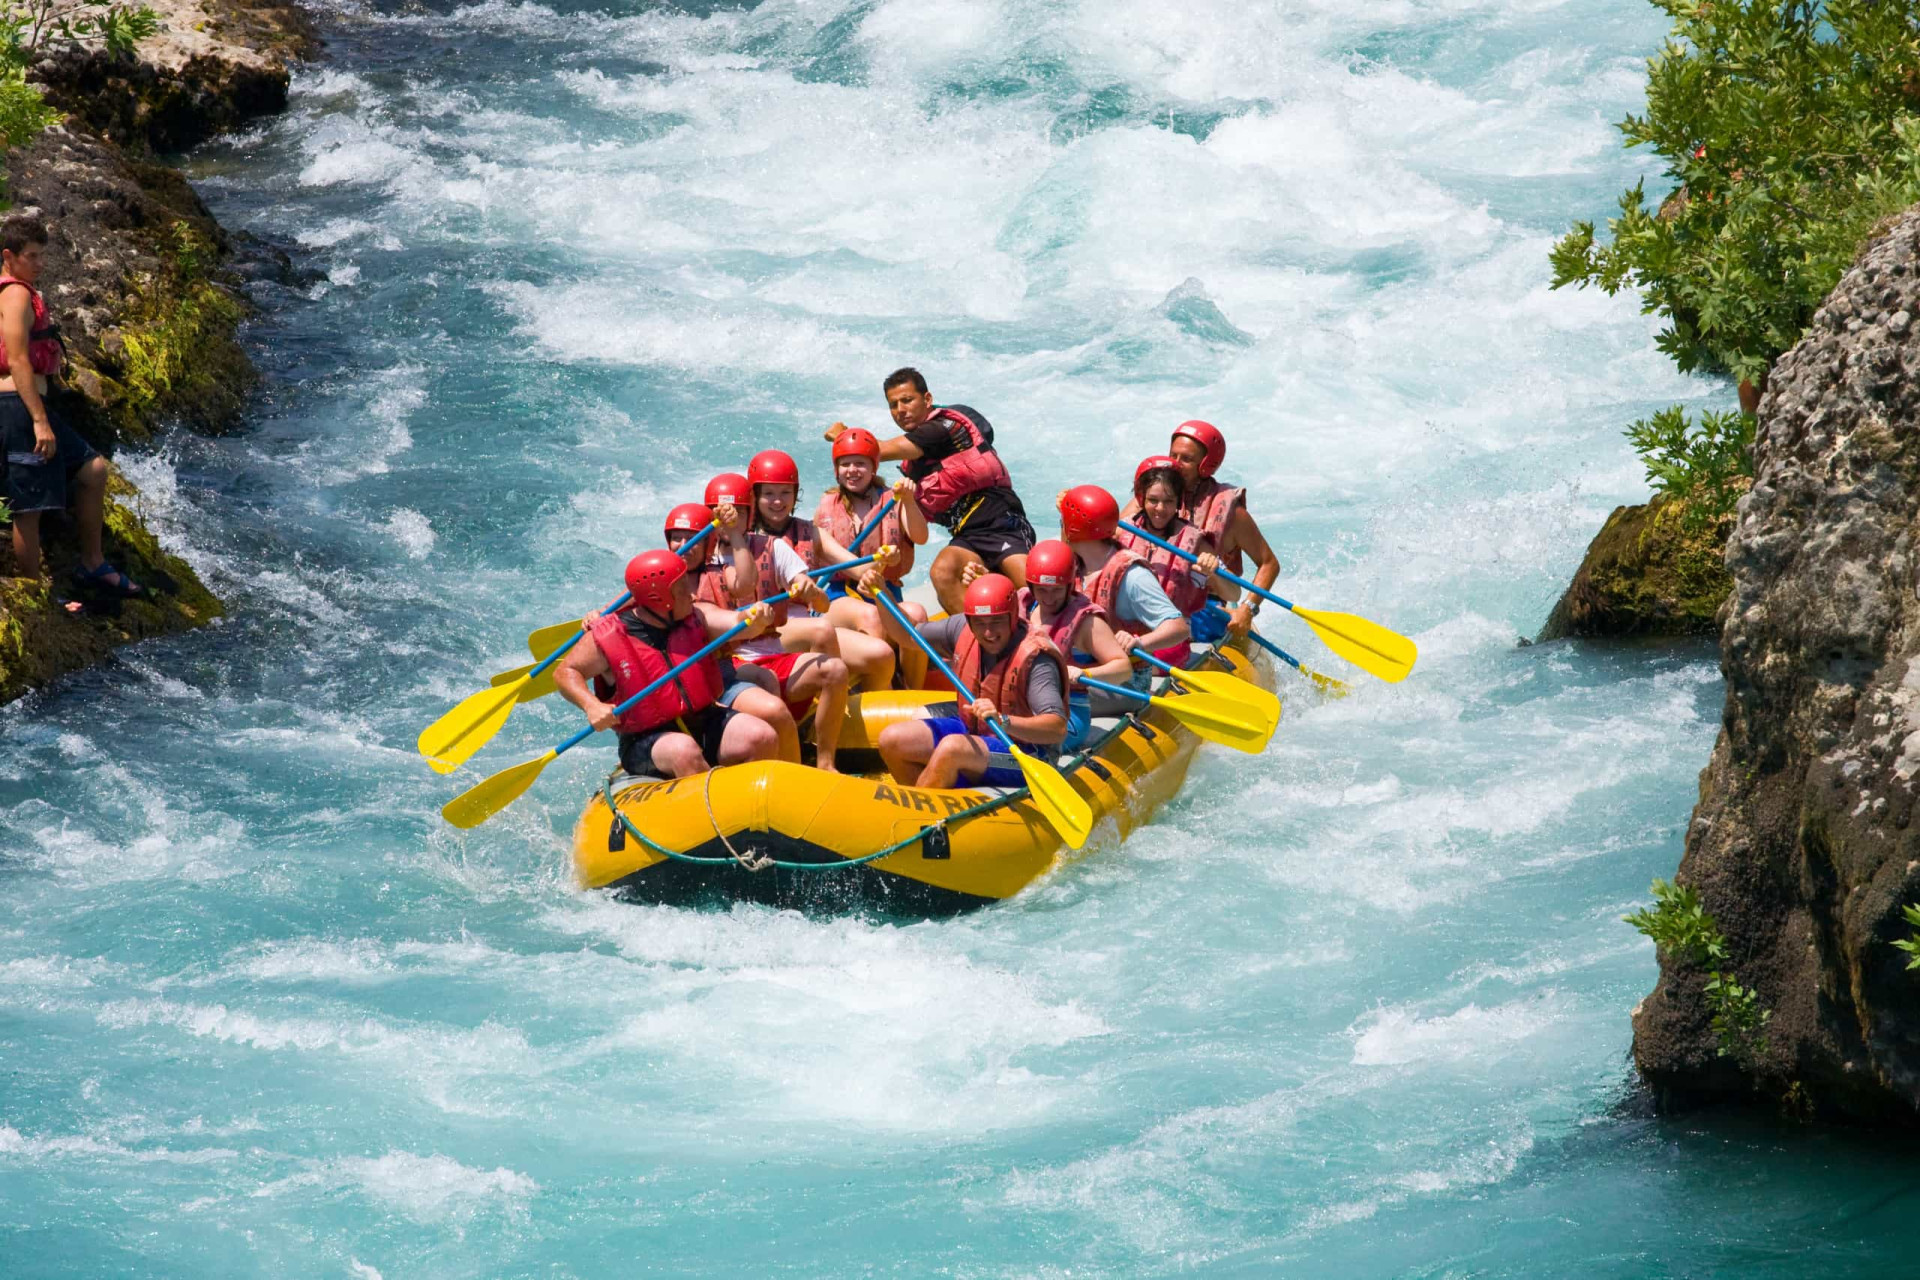 <p>A challenging but tremendously fun profession, a <a href="https://www.starsinsider.com/travel/410783/river-wild-the-worlds-most-insane-white-water-rafting-destinations" rel="noopener">raft</a> guide must know how to rig and maneuver vessels, and possess strong teamwork and leadership skills. Interestingly, guides are also usually required to obtain a food handler's license, as preparing food is a large component of the job. Oh, and be prepared to get your feet wet!</p><p>You may also like:<a href="https://www.starsinsider.com/n/172277?utm_source=msn.com&utm_medium=display&utm_campaign=referral_description&utm_content=434684v2en-us"> Mind-blowing facts about the US that most Americans would be shocked to learn</a></p>